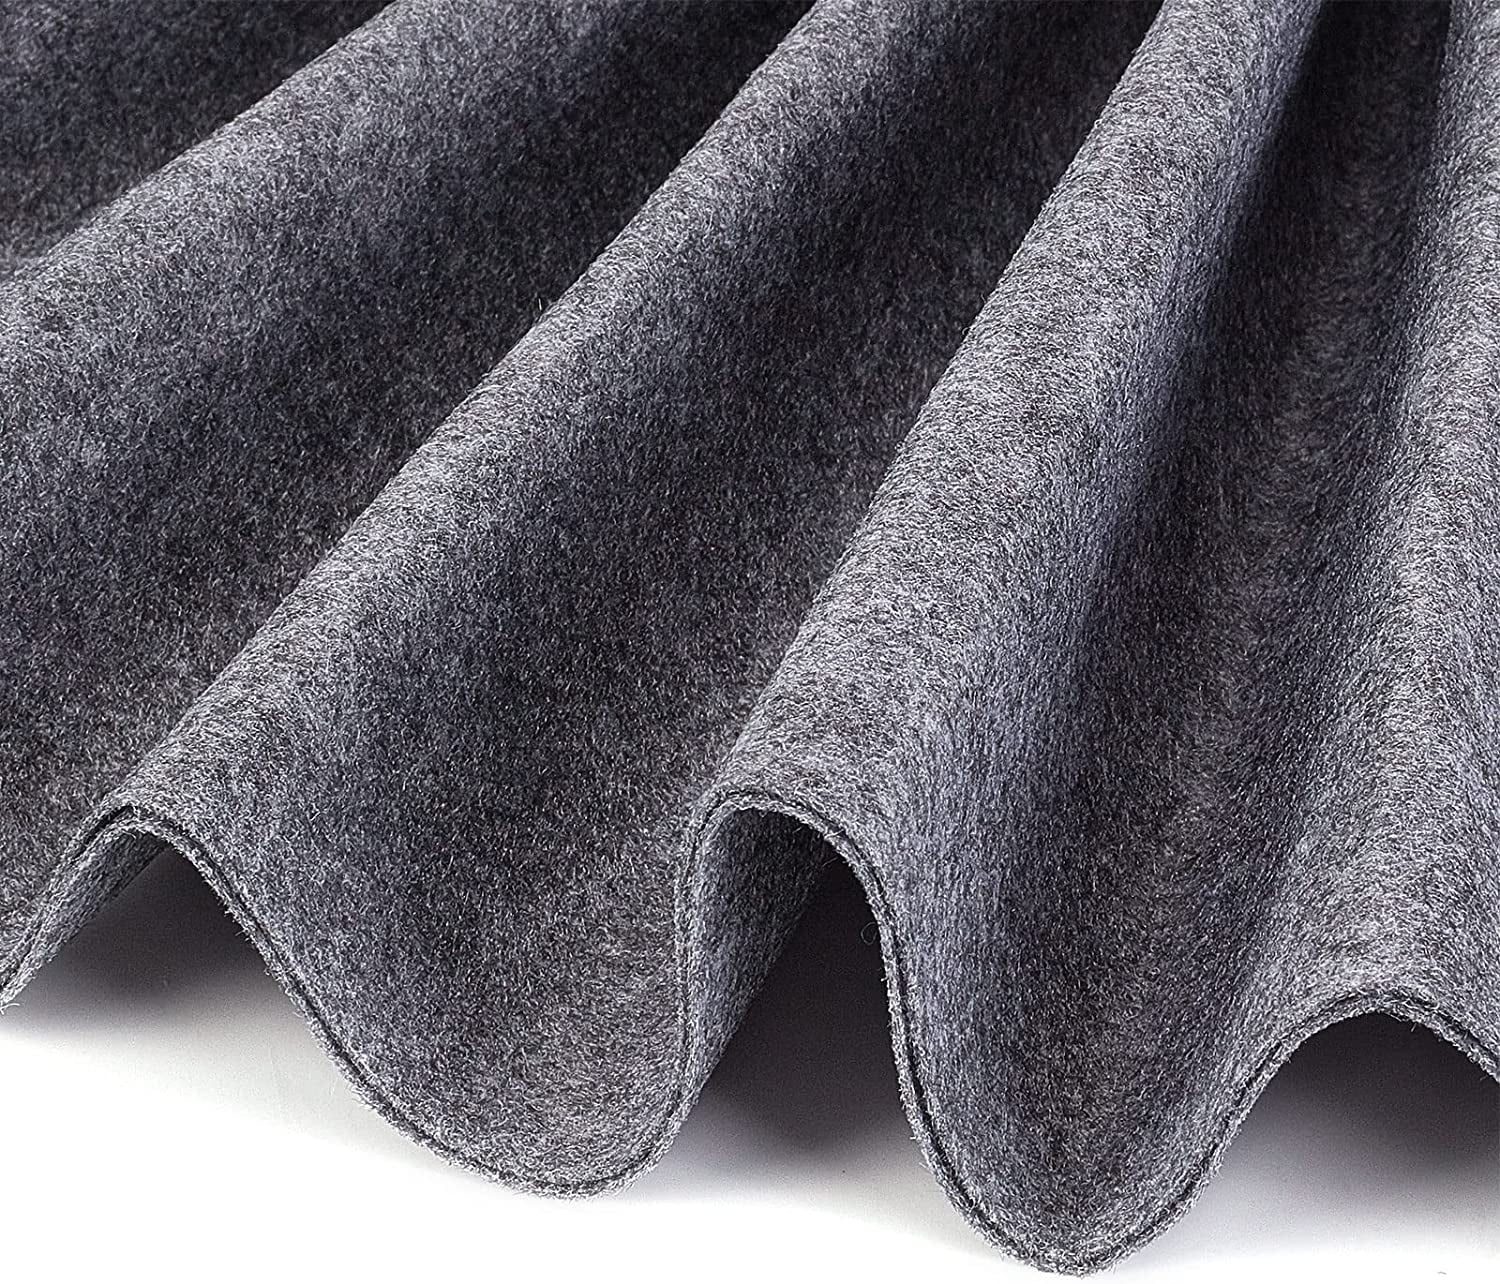  ZAIONE Black White Felt Fabric Sheets 7 Rolls 8''x35'' Soft  Felt Sheets Assorted Thick Felt Roll for Crafts : Everything Else